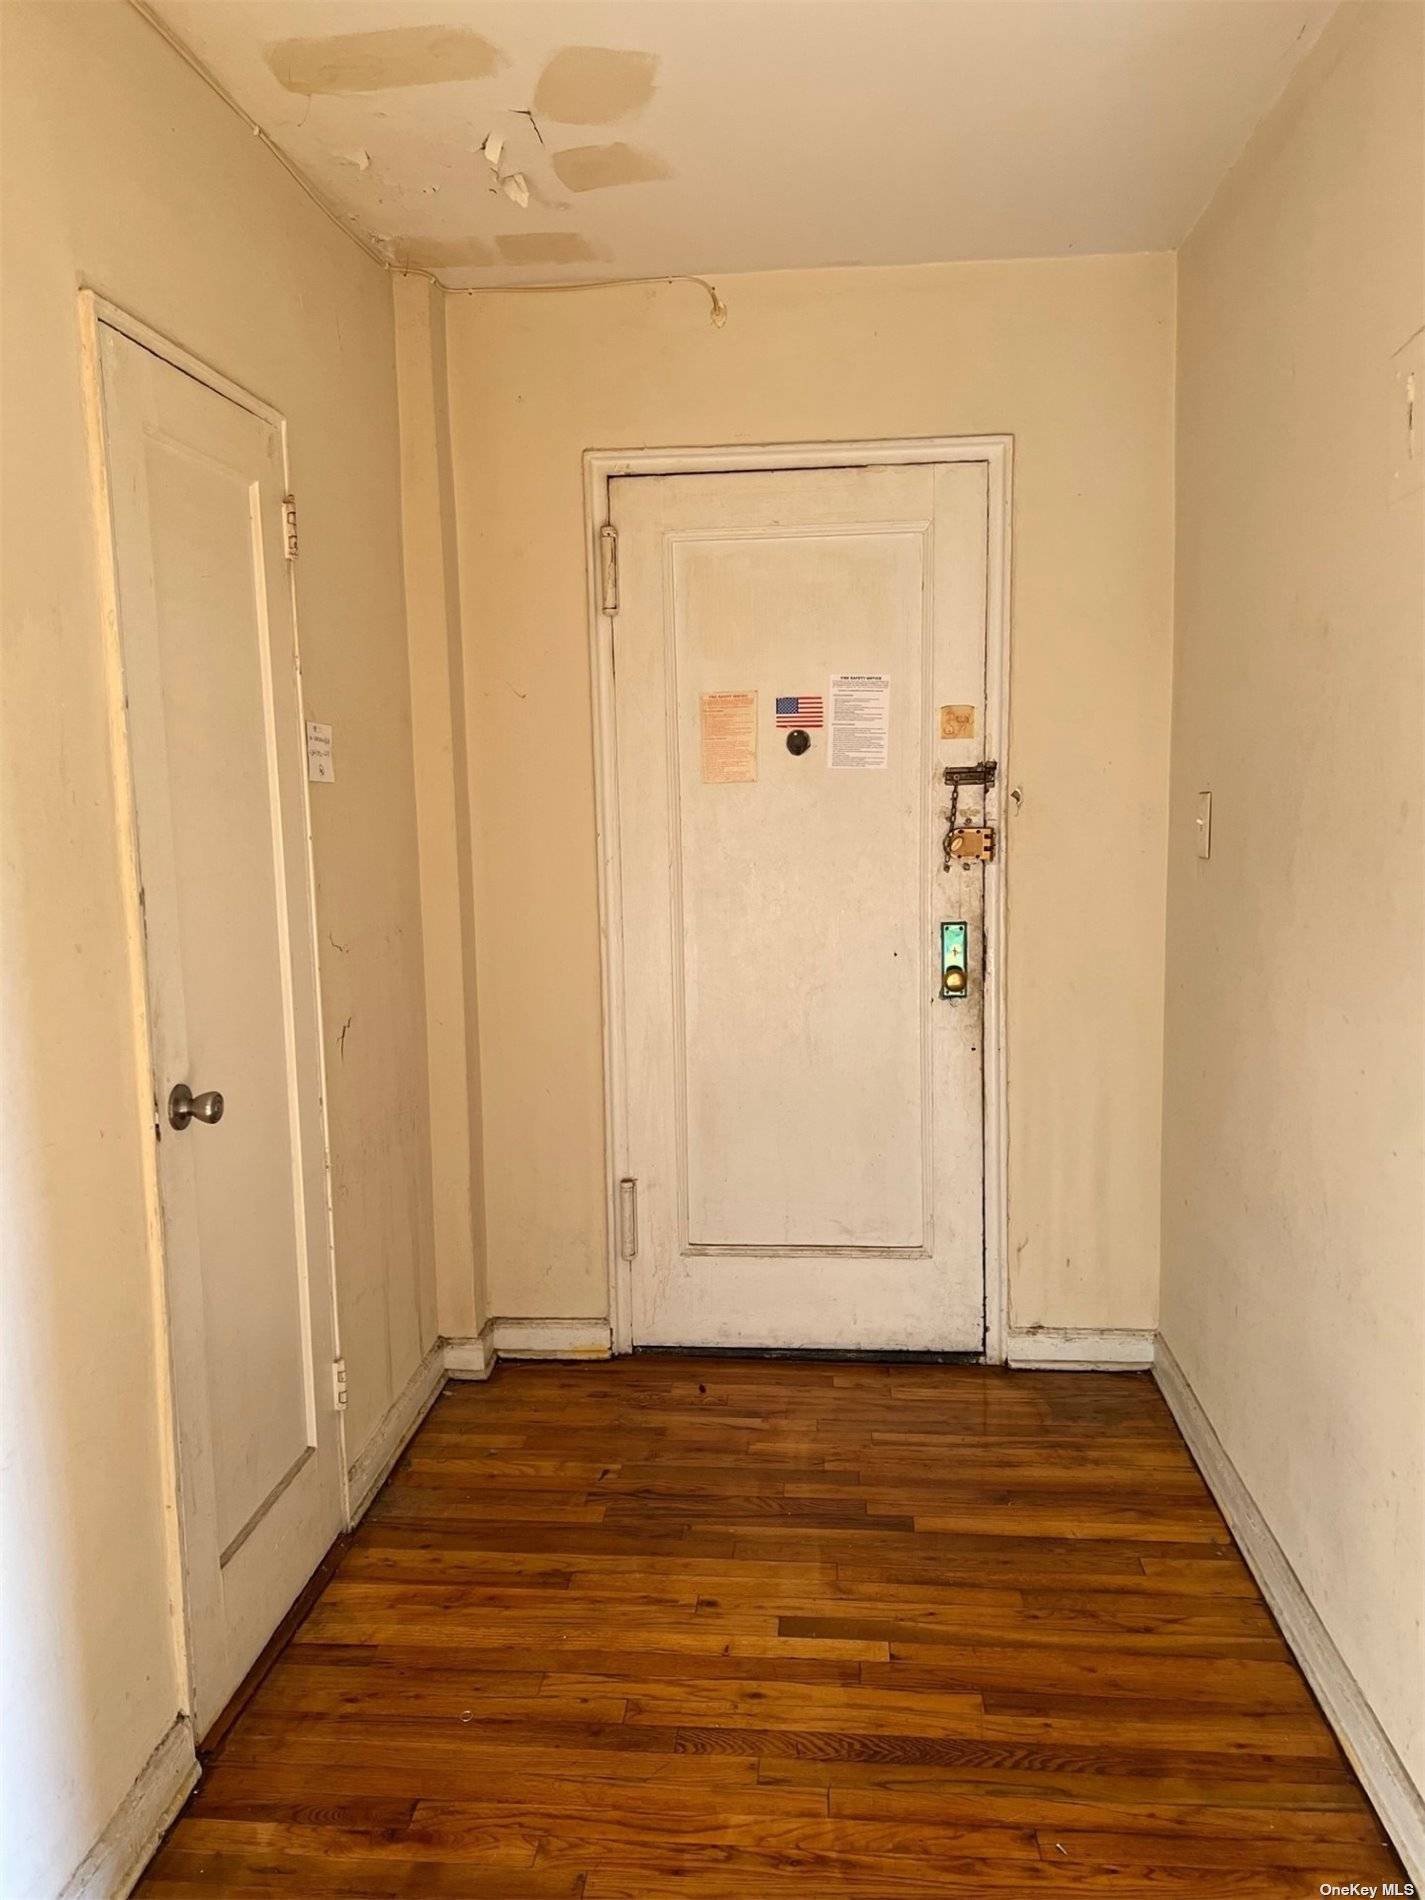 Large 2BRS, 1 Bath coop apartment in heart of down town Flushing, close to all shopping, subway, LIRR, school, etc.